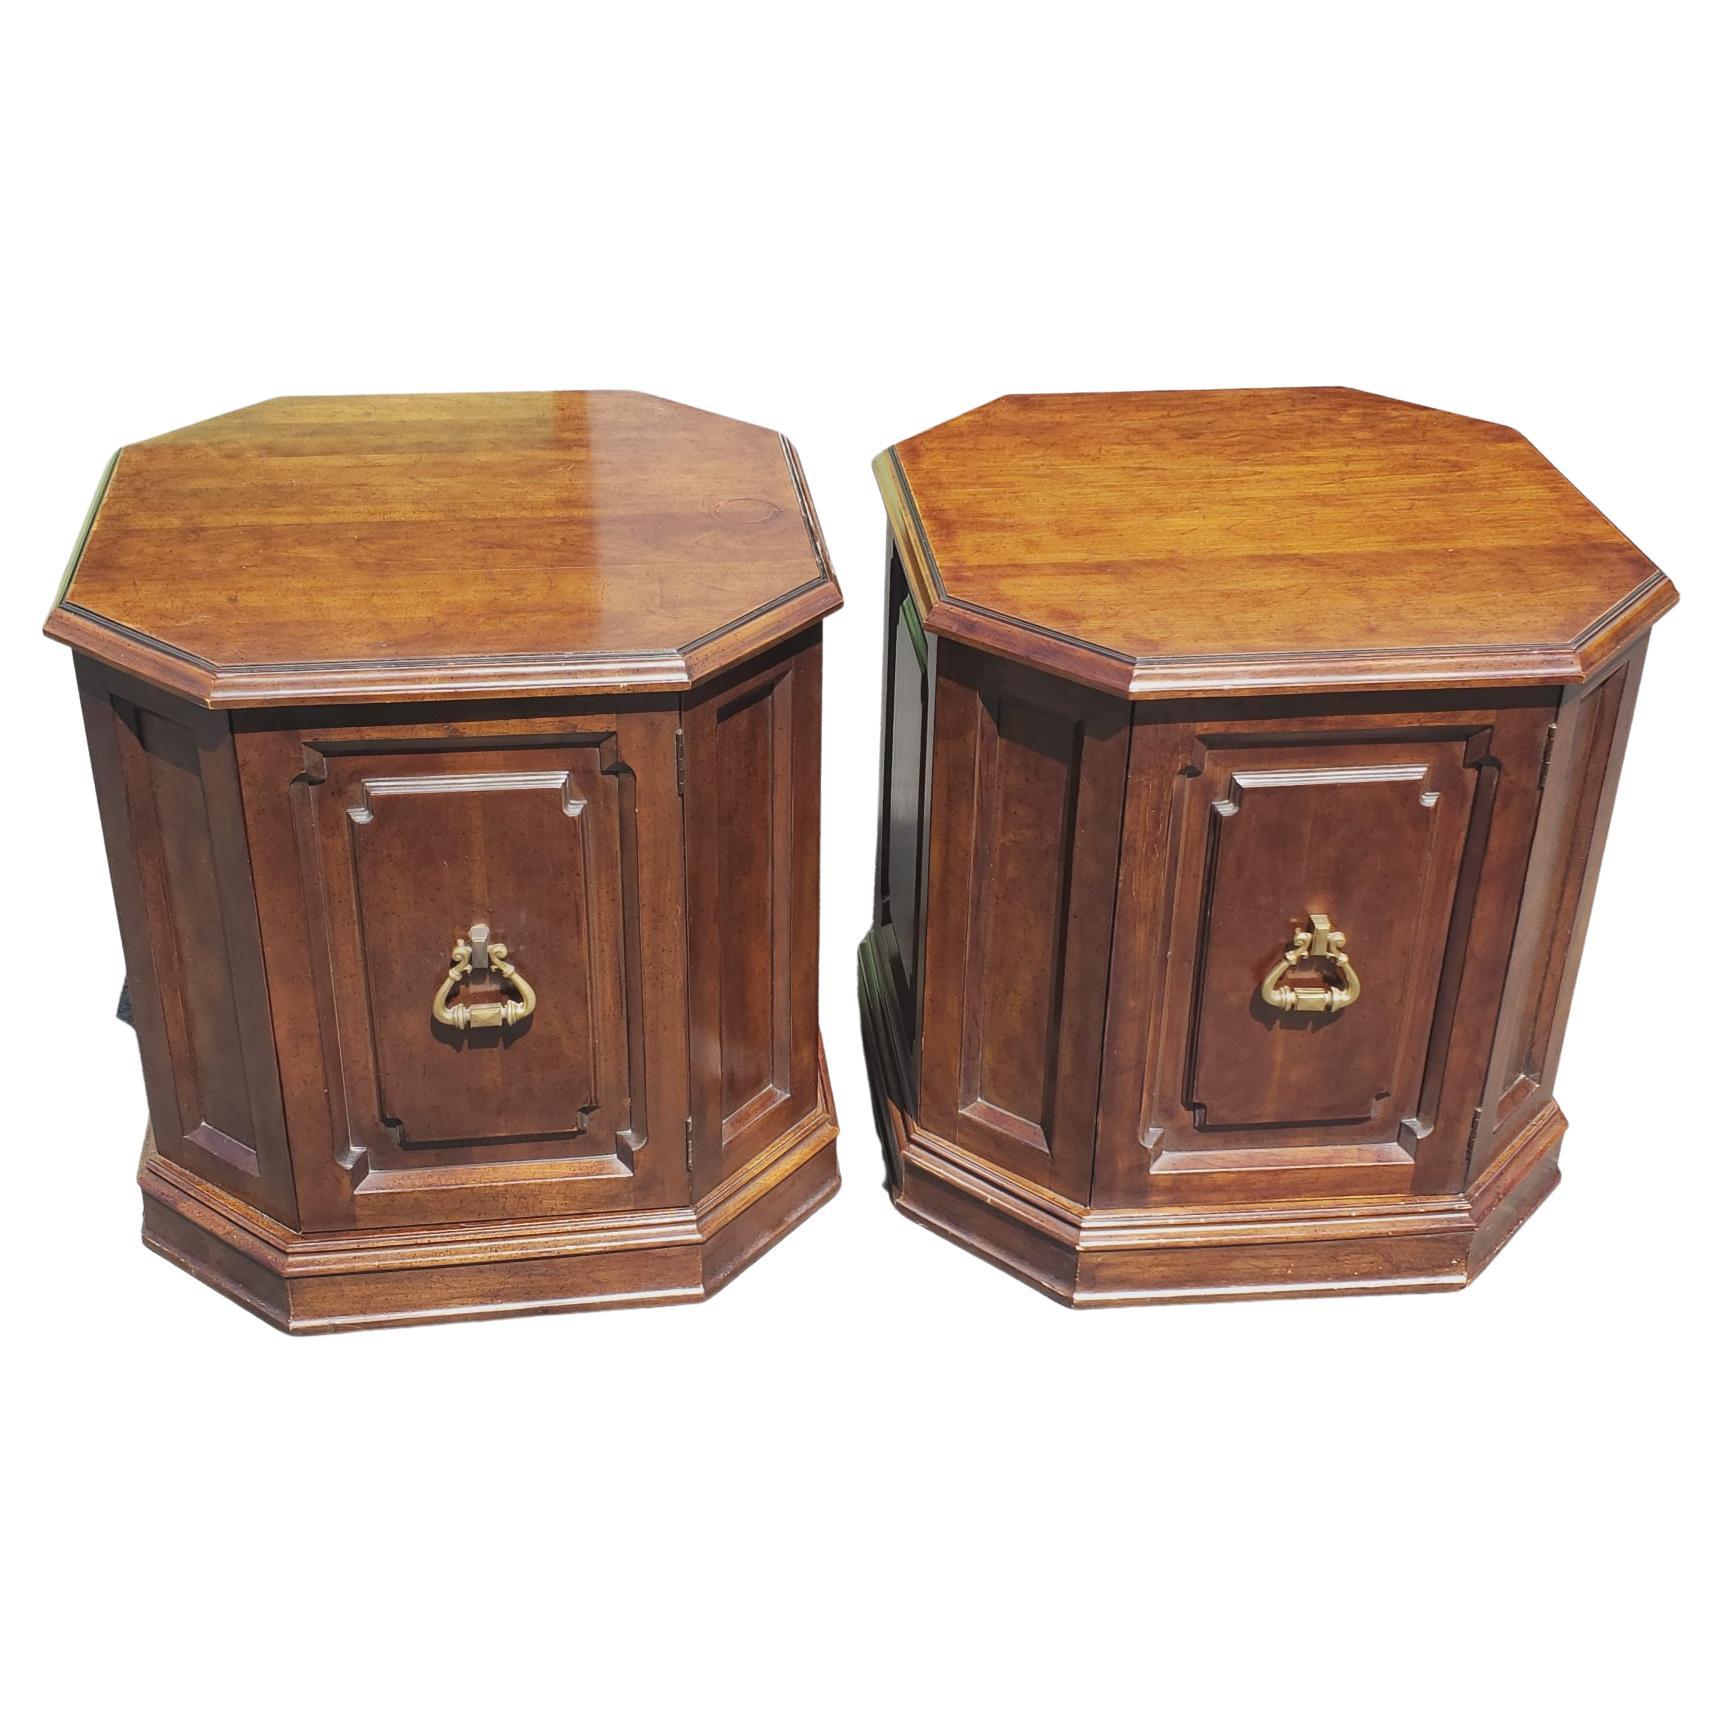 Pair of Davis Cabinet Co. Cherry Octogonal Commodes or Side Tables